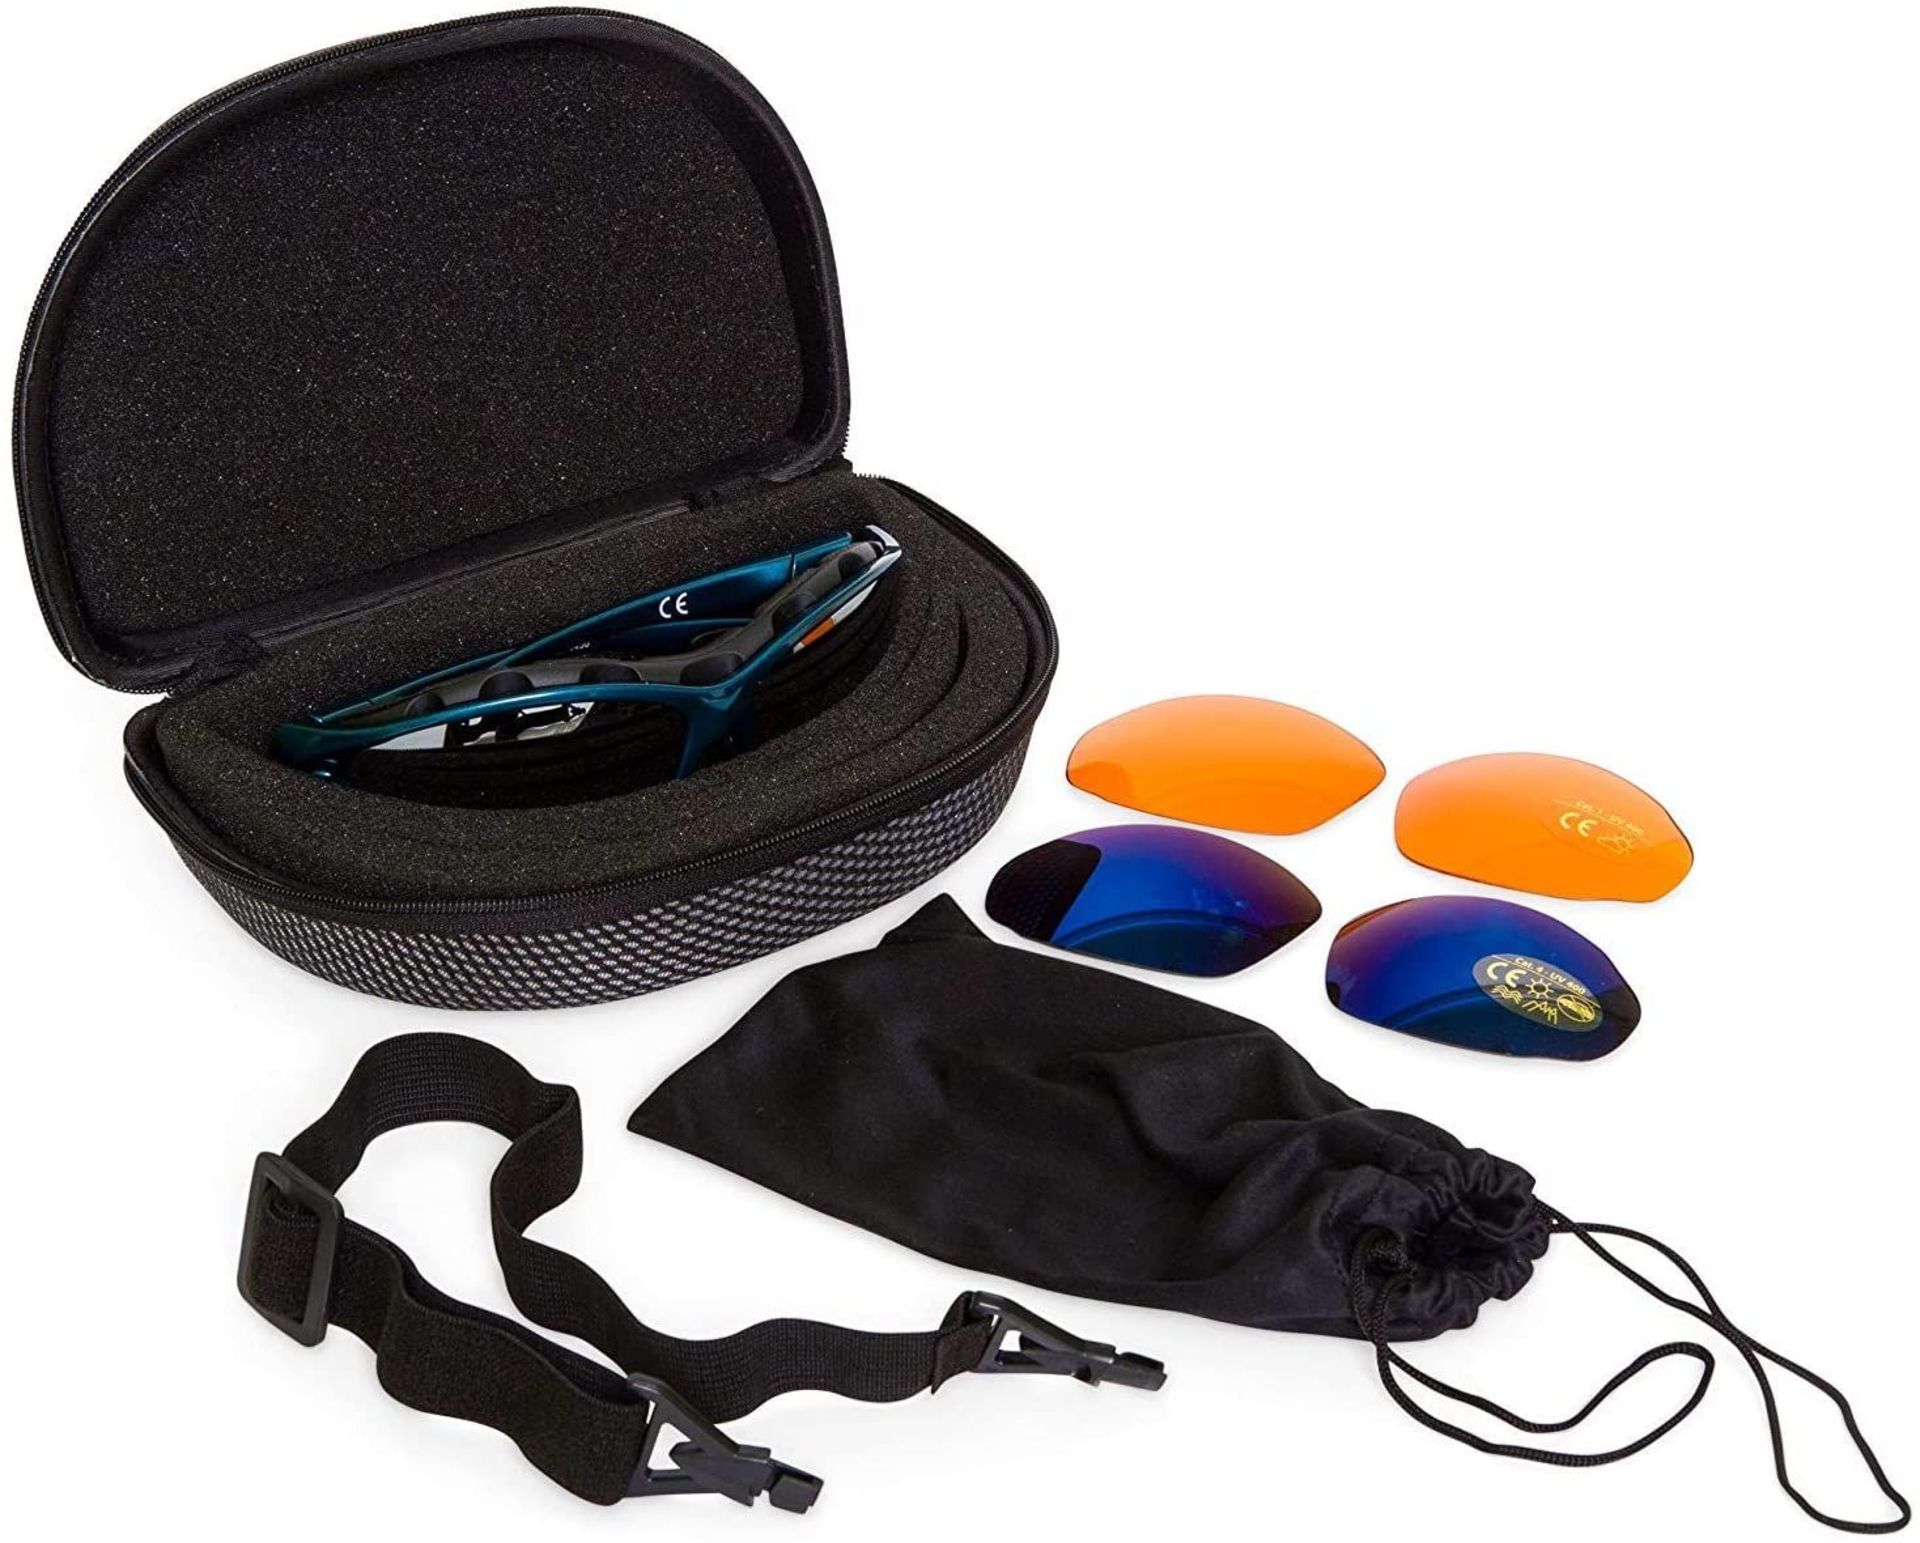 2x Vivess - Sportbrille Sport Glasses case - RRP £14.99 each packaged unchecked - Image 2 of 2